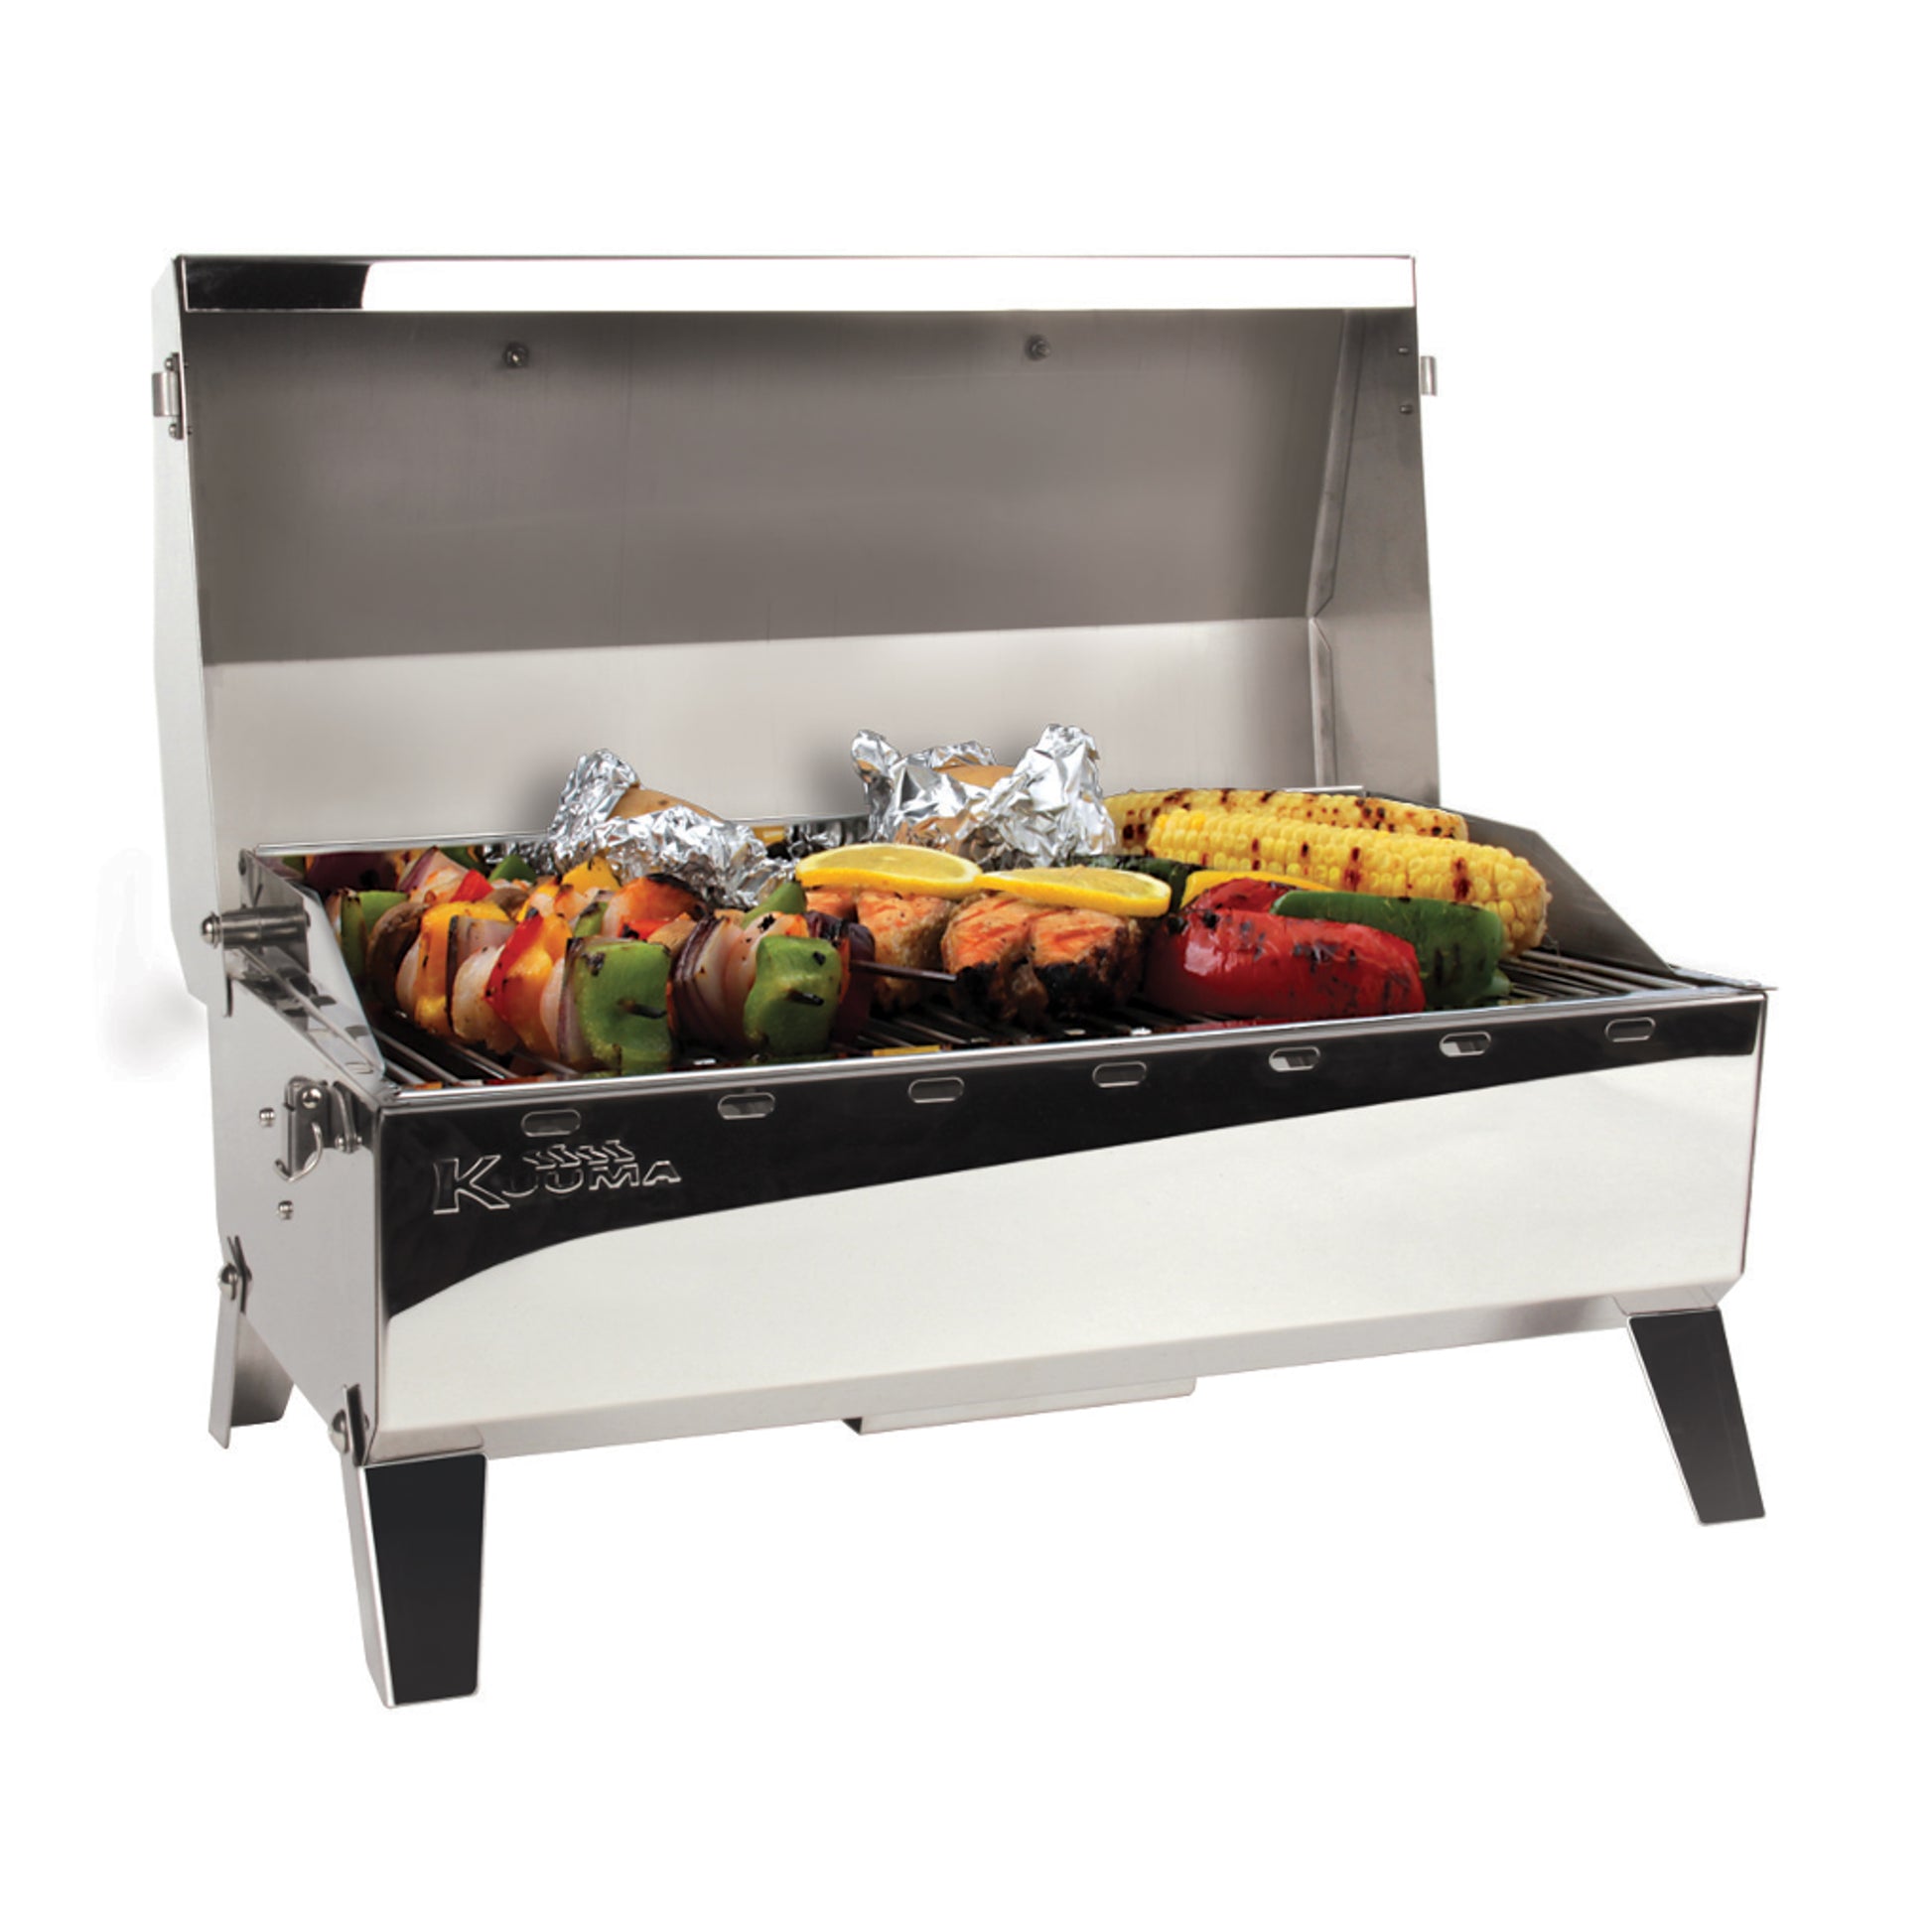 N' Go 160 Stainless Grill – Camco Marine